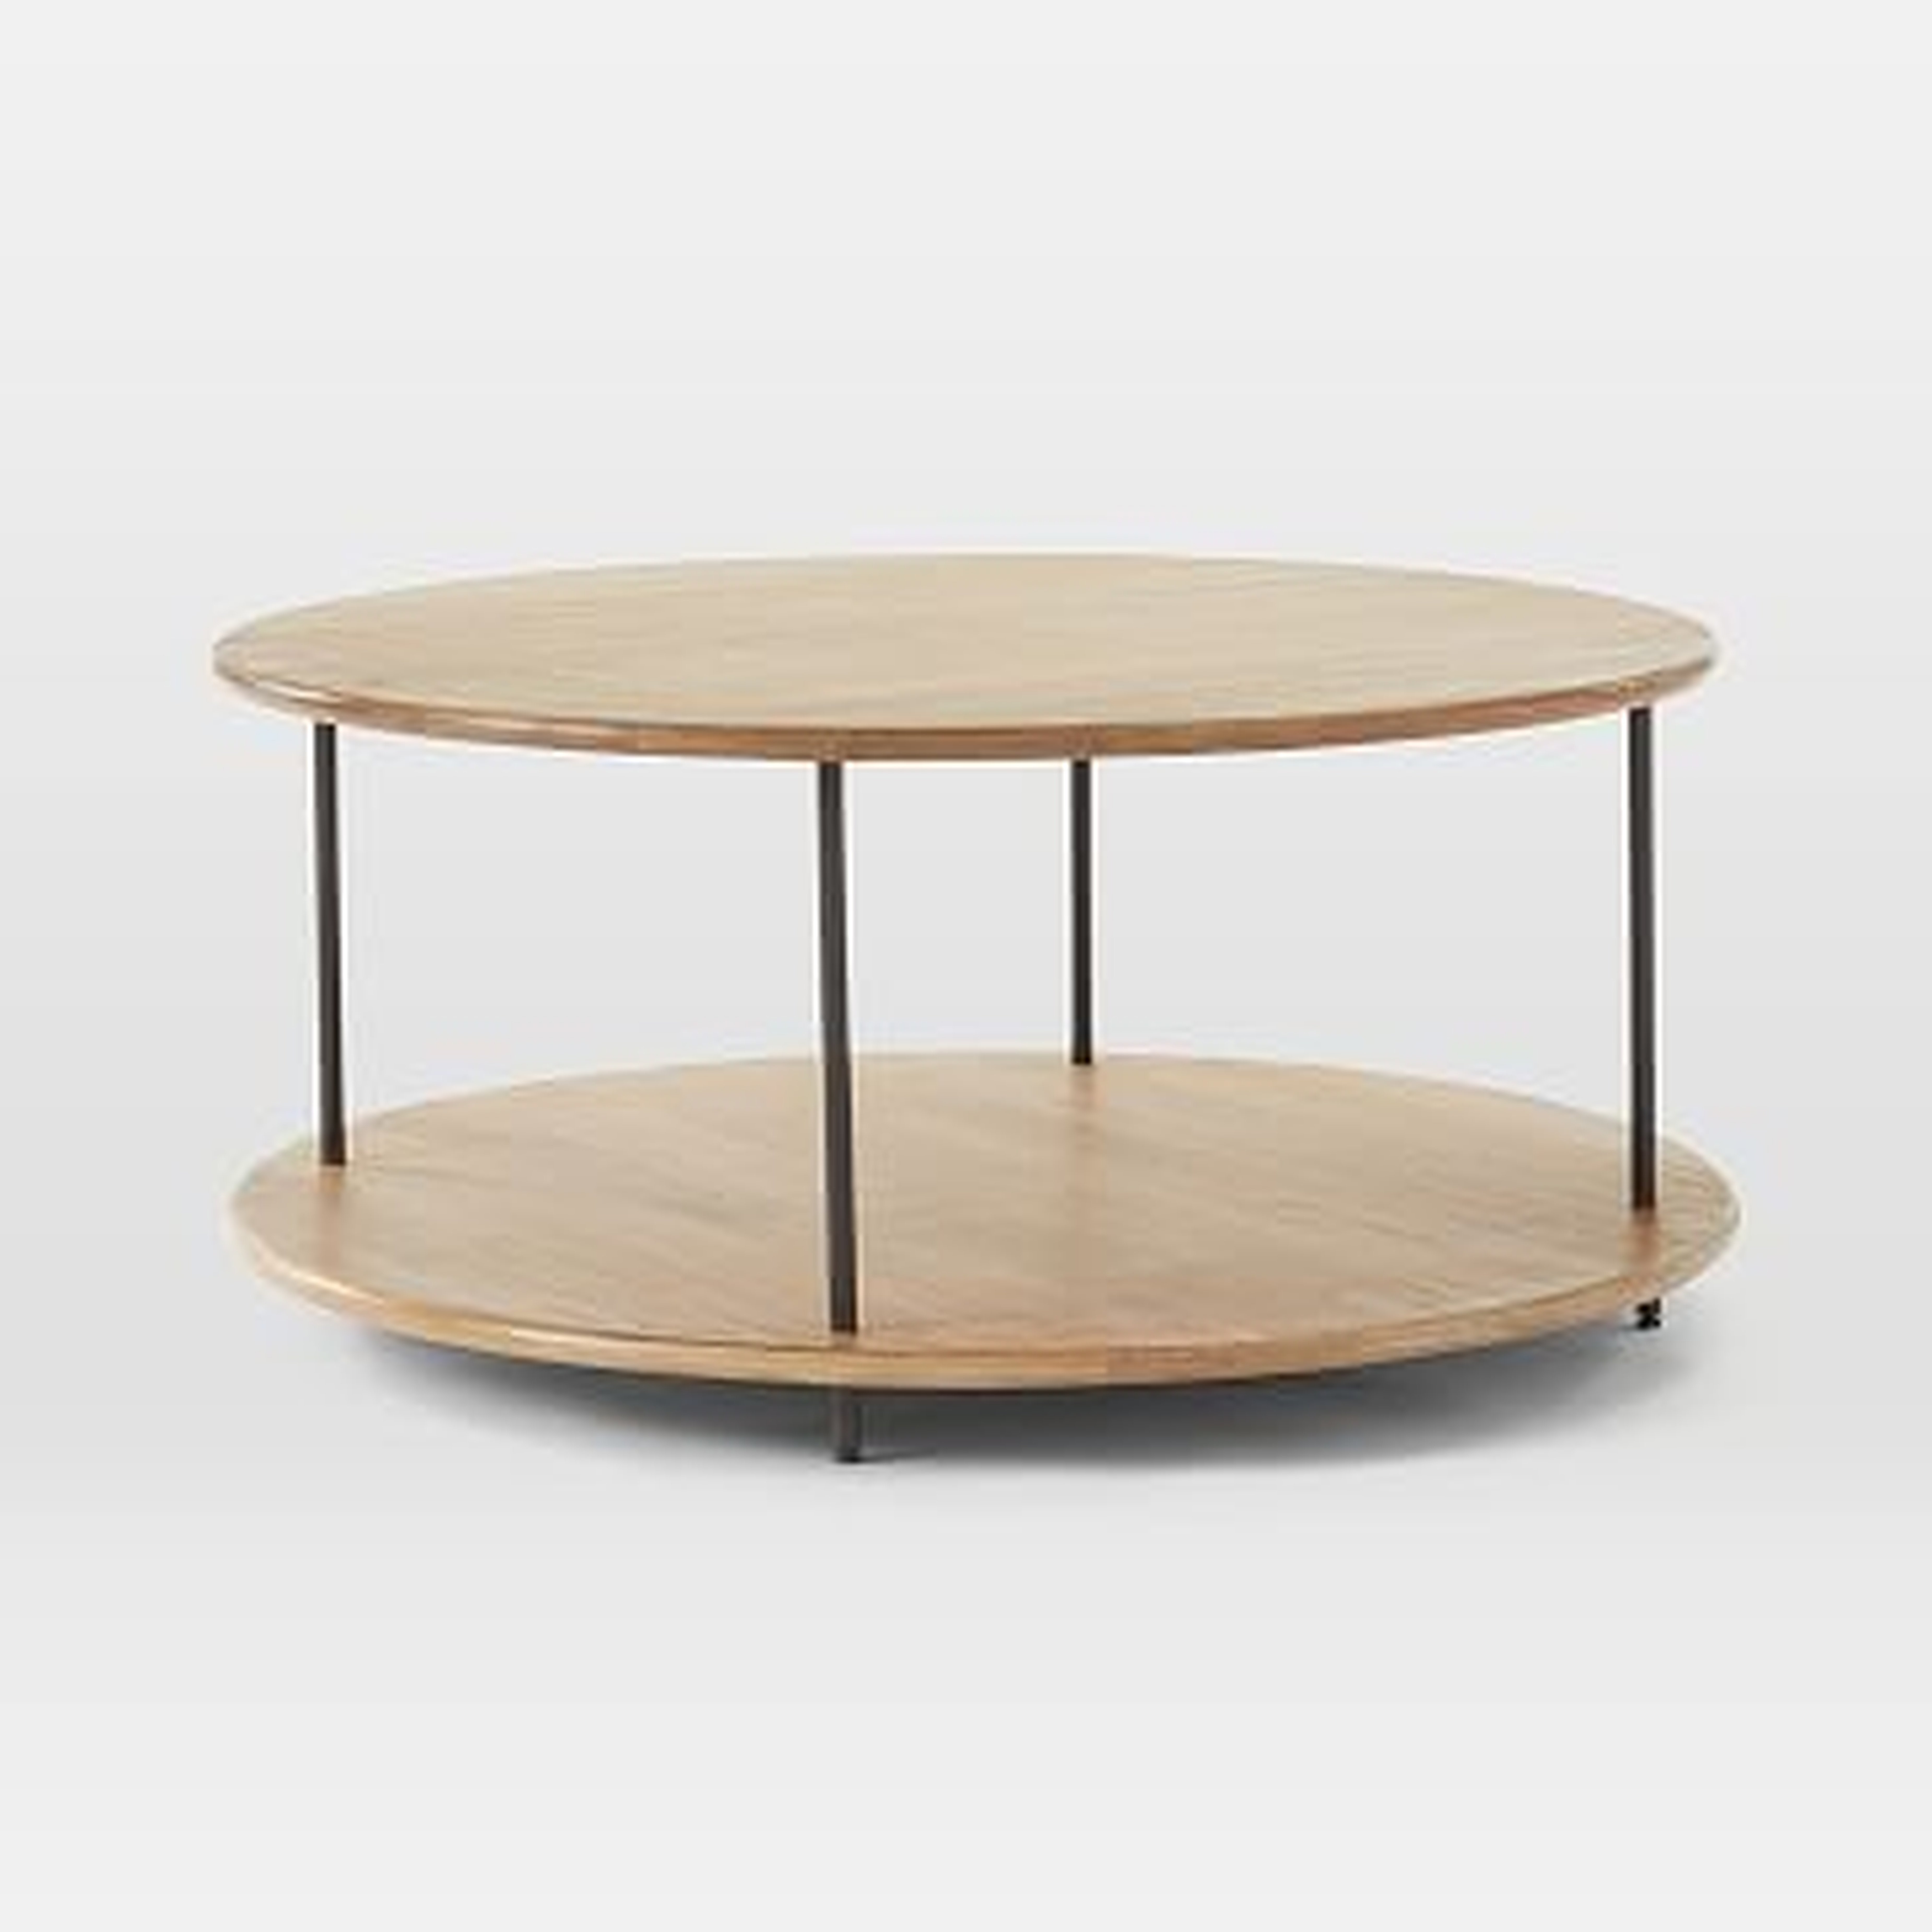 Tiered Wood Coffee Table - West Elm